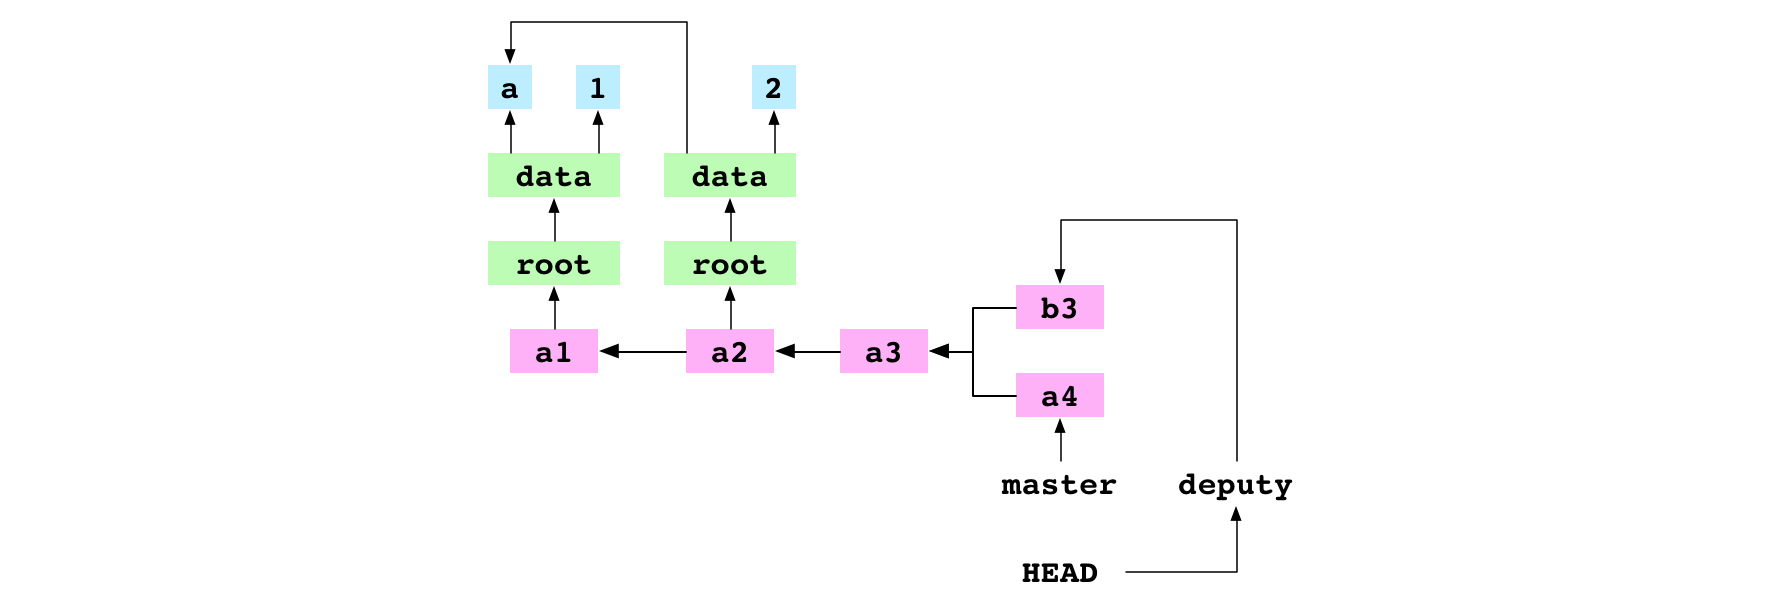 a3, the base commit of a4 and b3